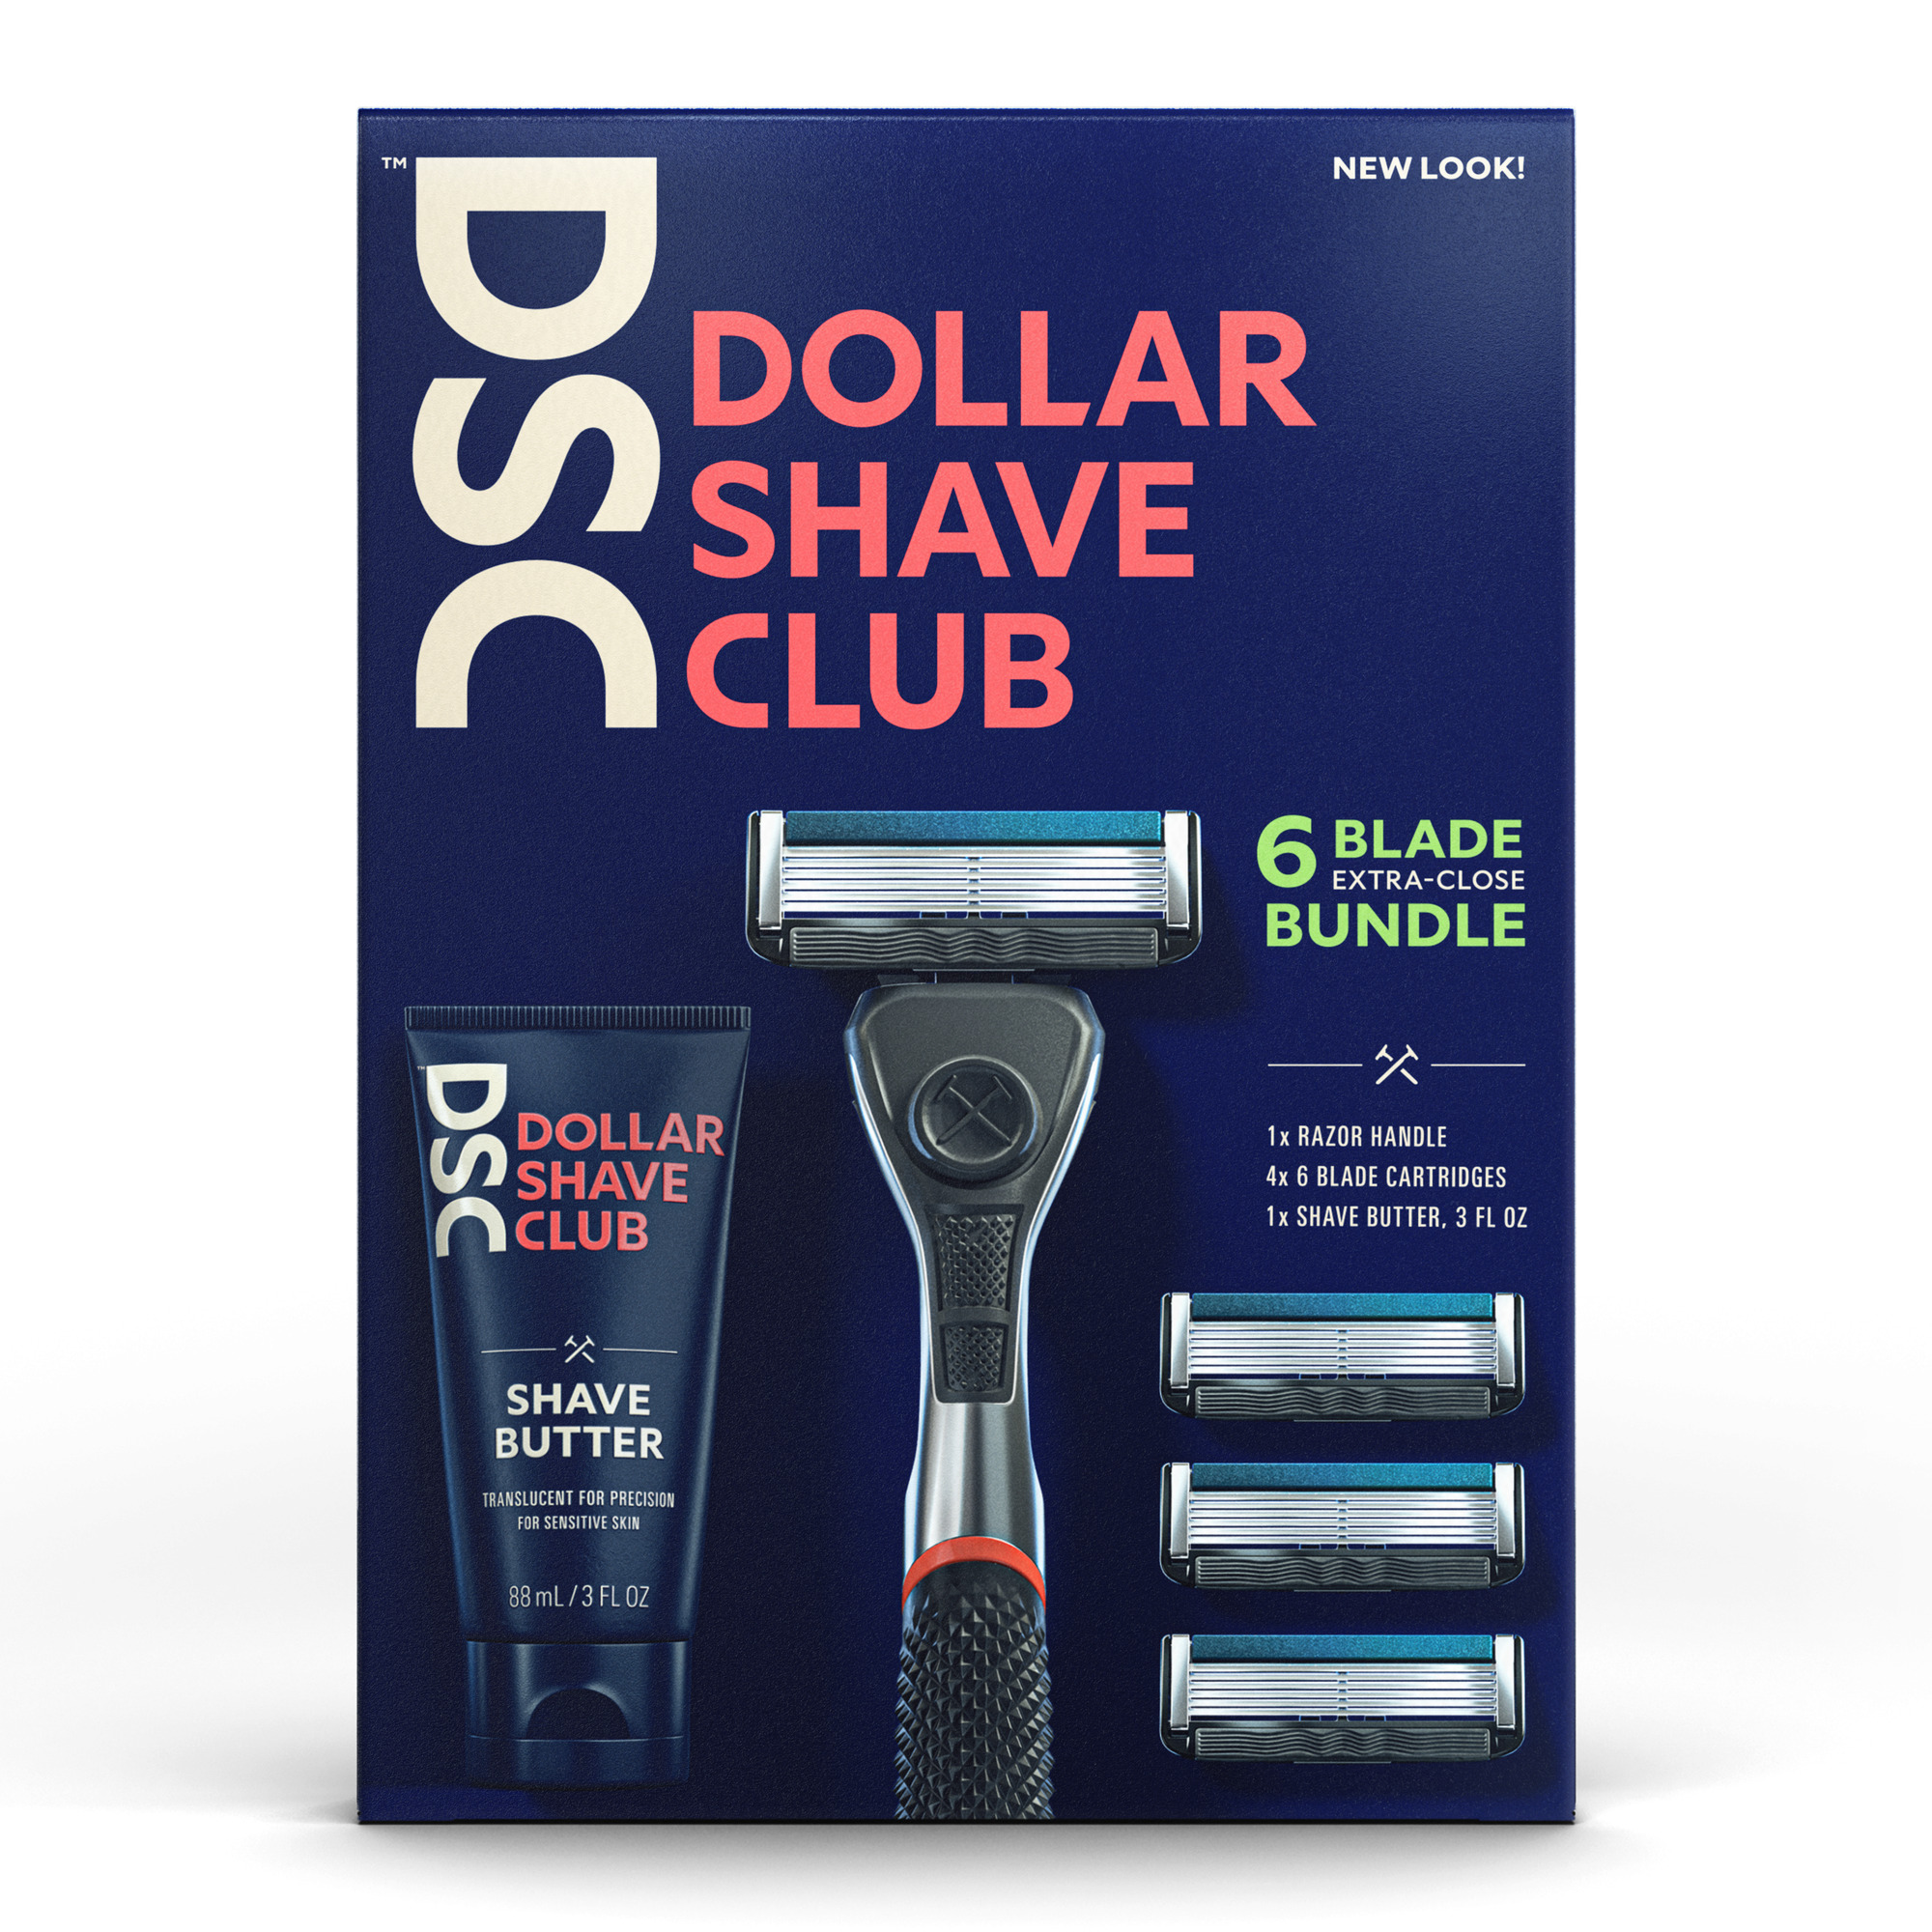 Dollar Shave Club 6-Blade Razor Bundle (Grey) with Shave Butter, 1 Handle, 4 Cartridges, 3 oz - image 1 of 5